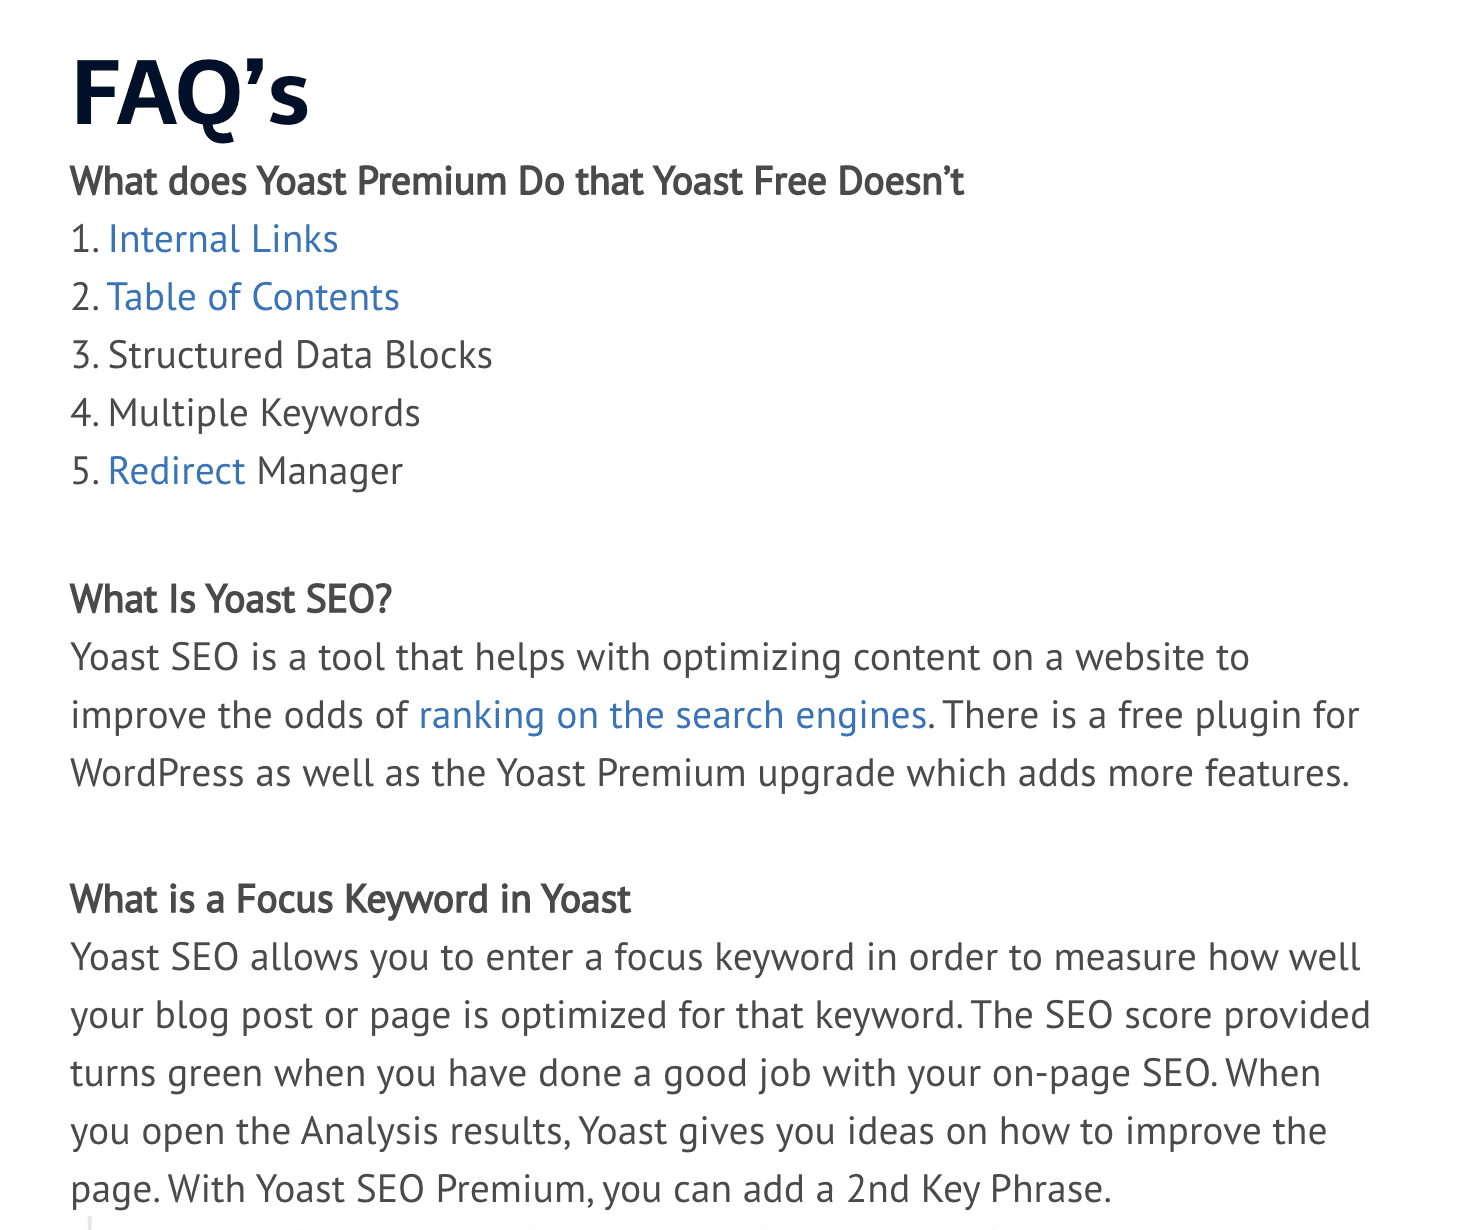 Sample of a FAQ section with the YOAST plugin